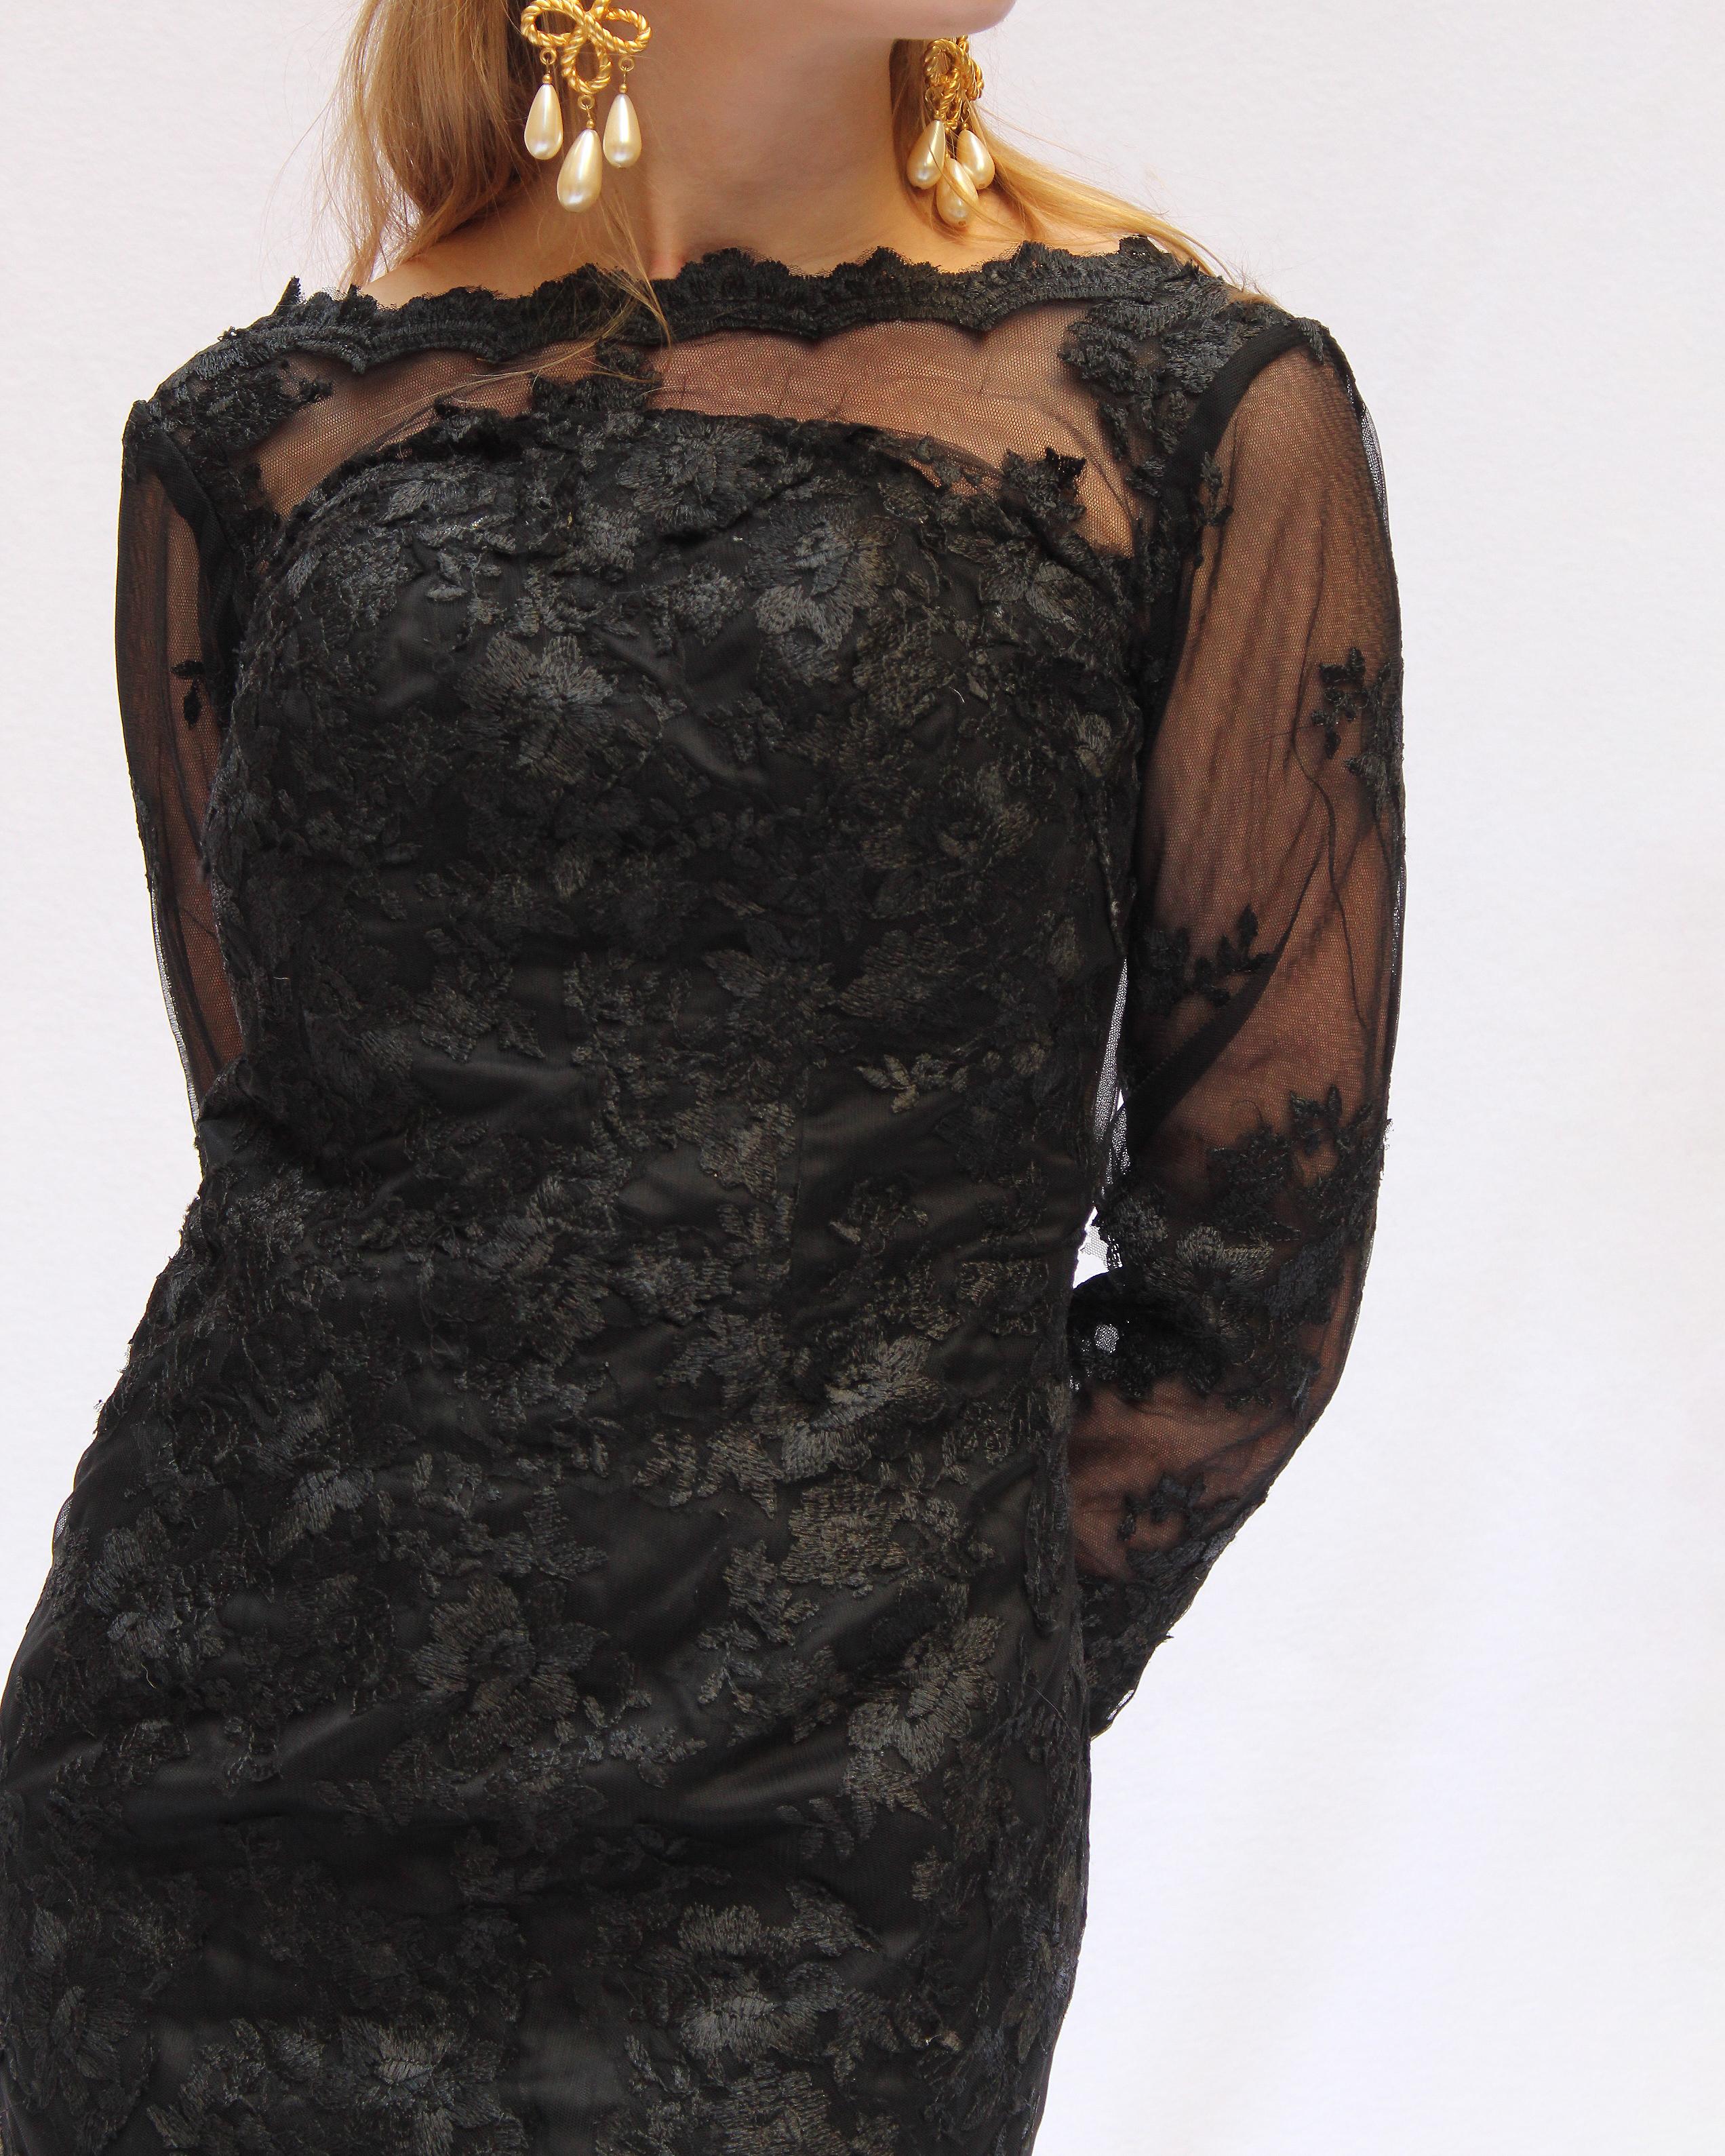 Men's Vintage Black Lace Gown, in the style of Dolce & Gabbana